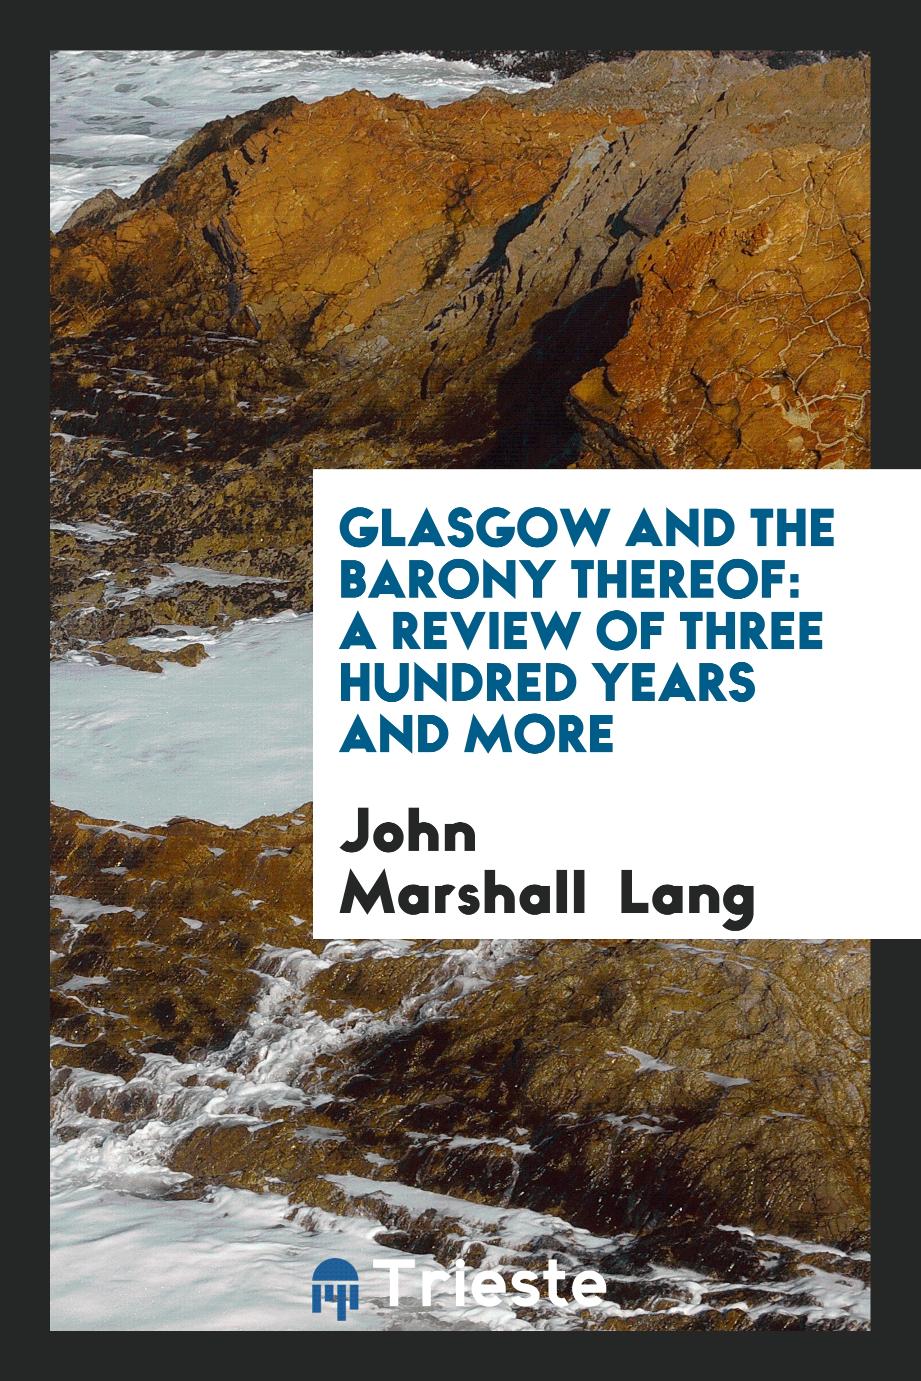 Glasgow and the Barony Thereof: A Review of Three Hundred Years and More